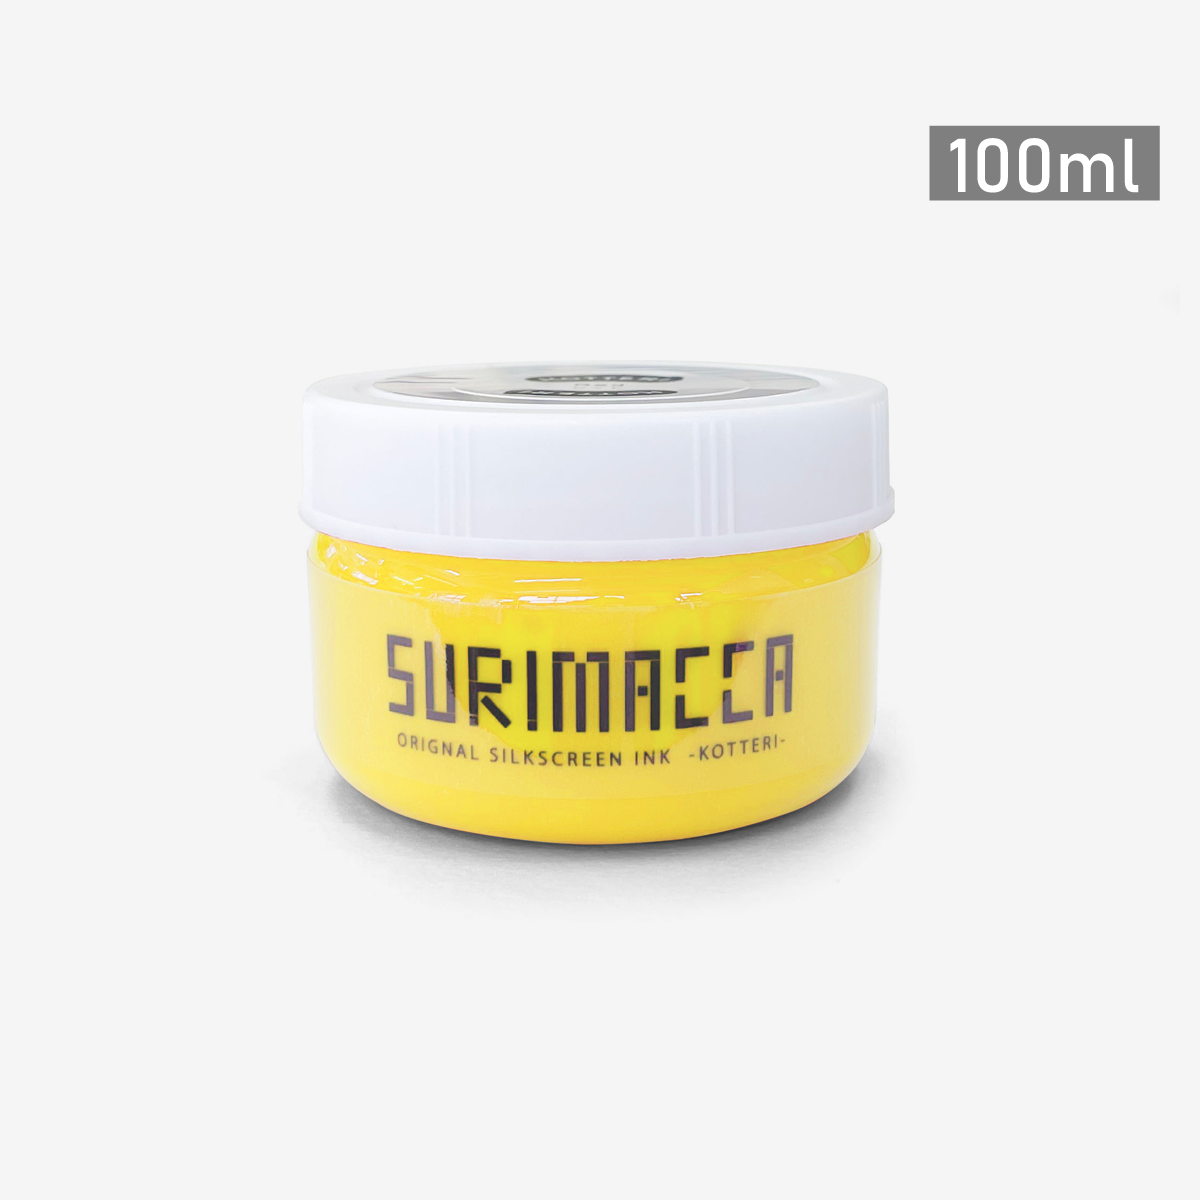 SURIMACCAインク　KOTTERI【イエロー】<img class='new_mark_img2' src='https://img.shop-pro.jp/img/new/icons1.gif' style='border:none;display:inline;margin:0px;padding:0px;width:auto;' />